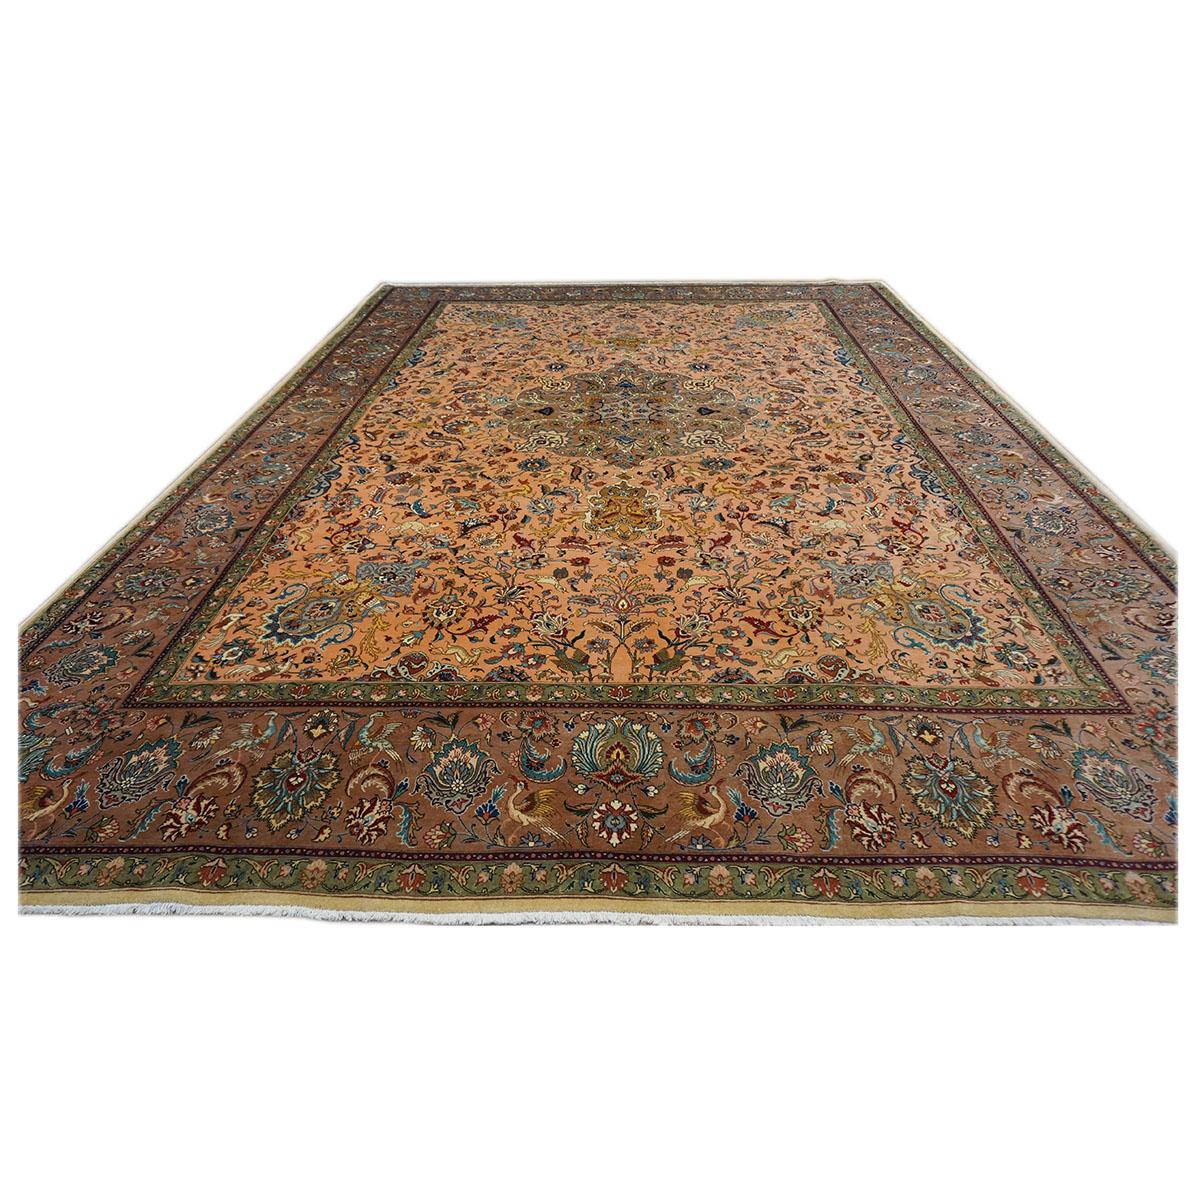 Wool Antique 1930s Persian Tabriz Pahlavi 9X13 Salmon Pink & Nutmeg Brown Area Rug For Sale